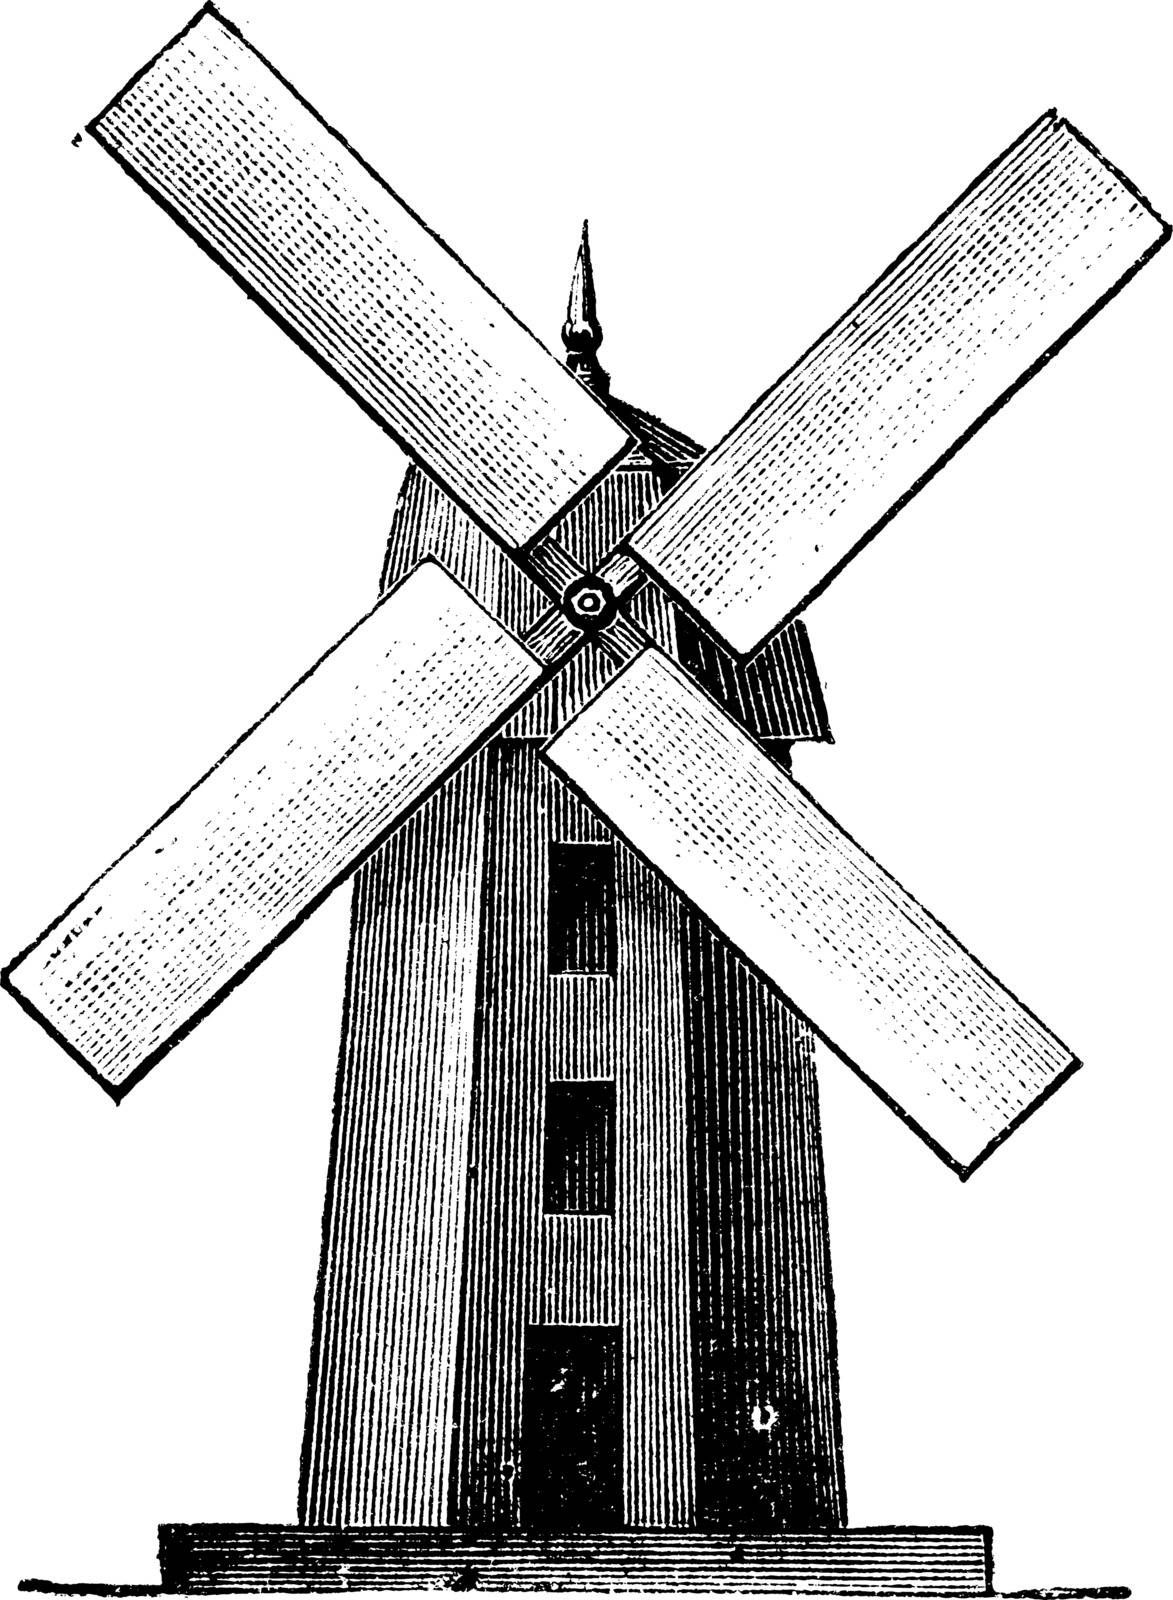 Windmill, vintage engraving by Morphart